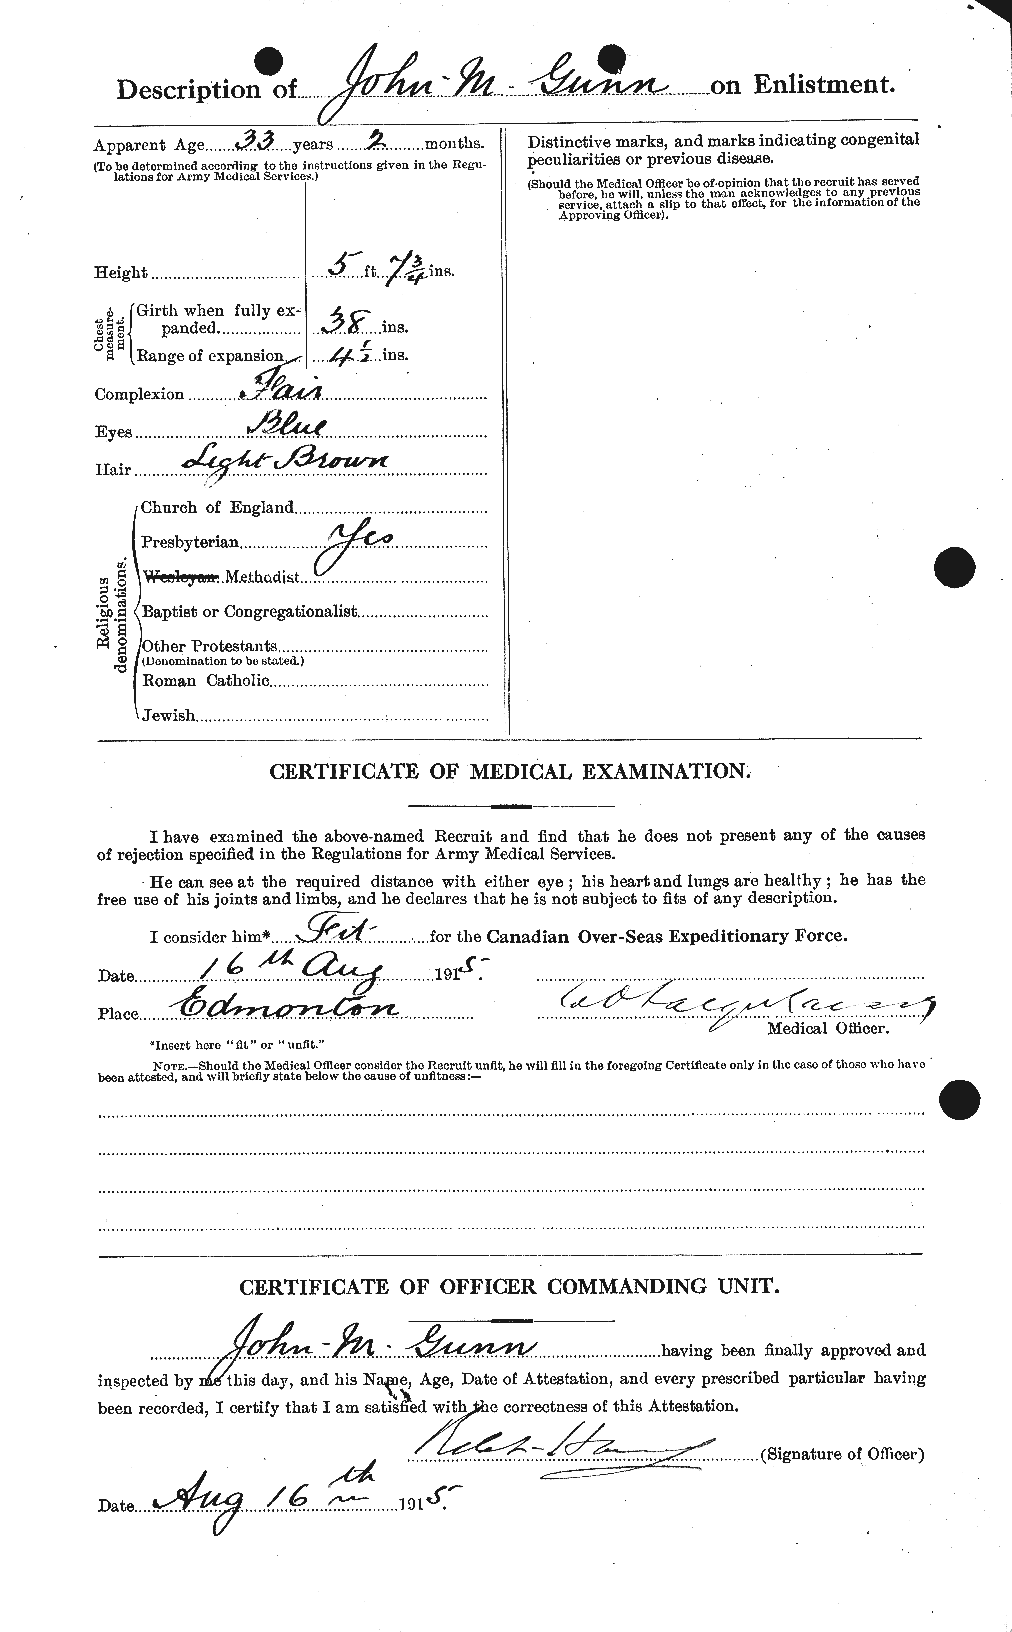 Personnel Records of the First World War - CEF 369297b